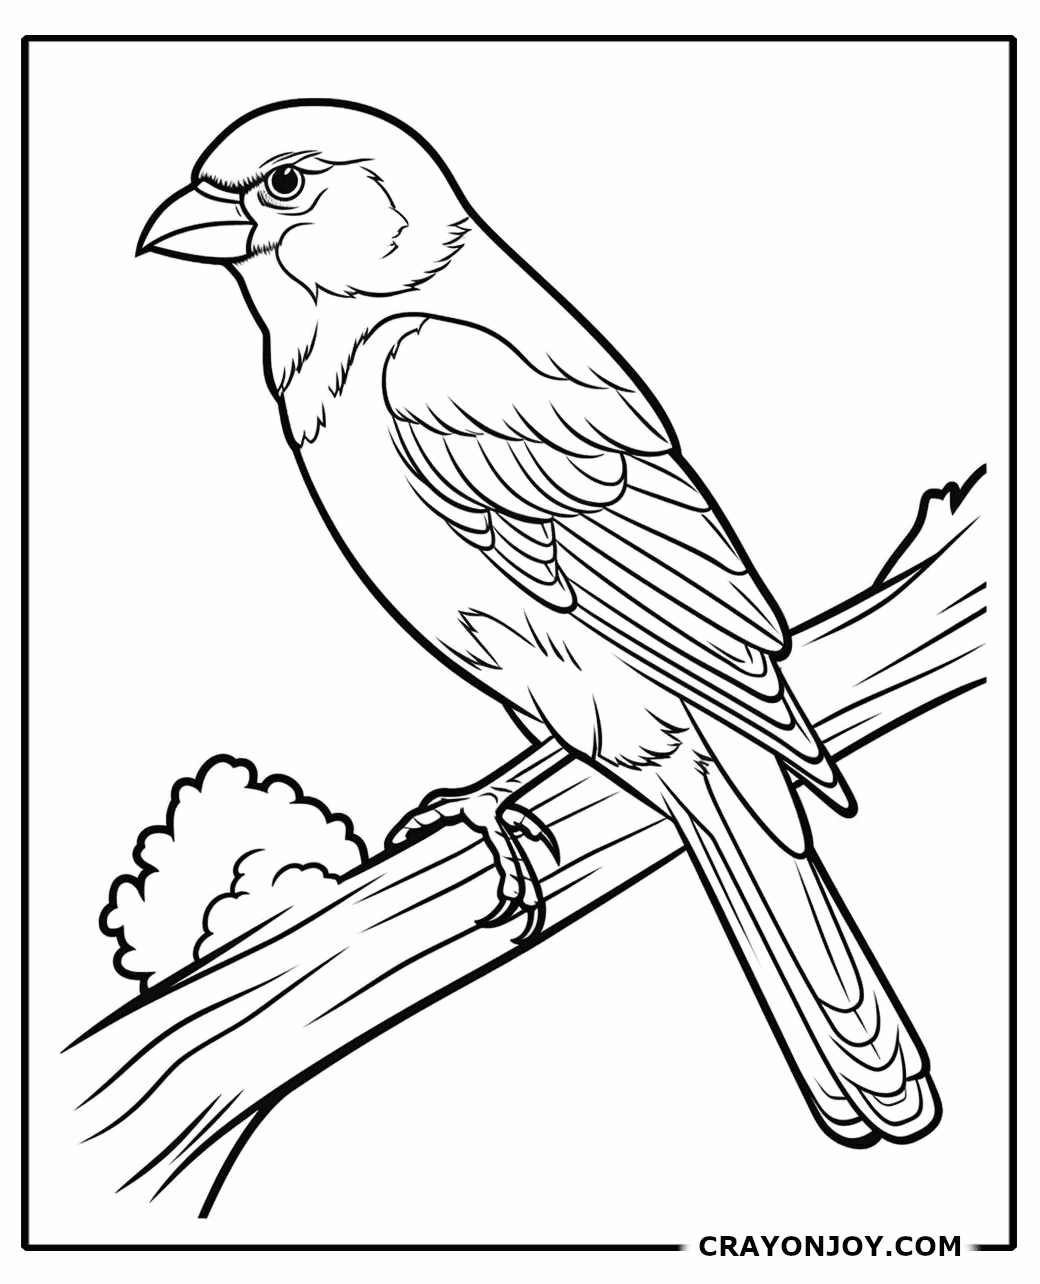 Crossbill Coloring Pages: Free Printable Sheets for Kids and Adults